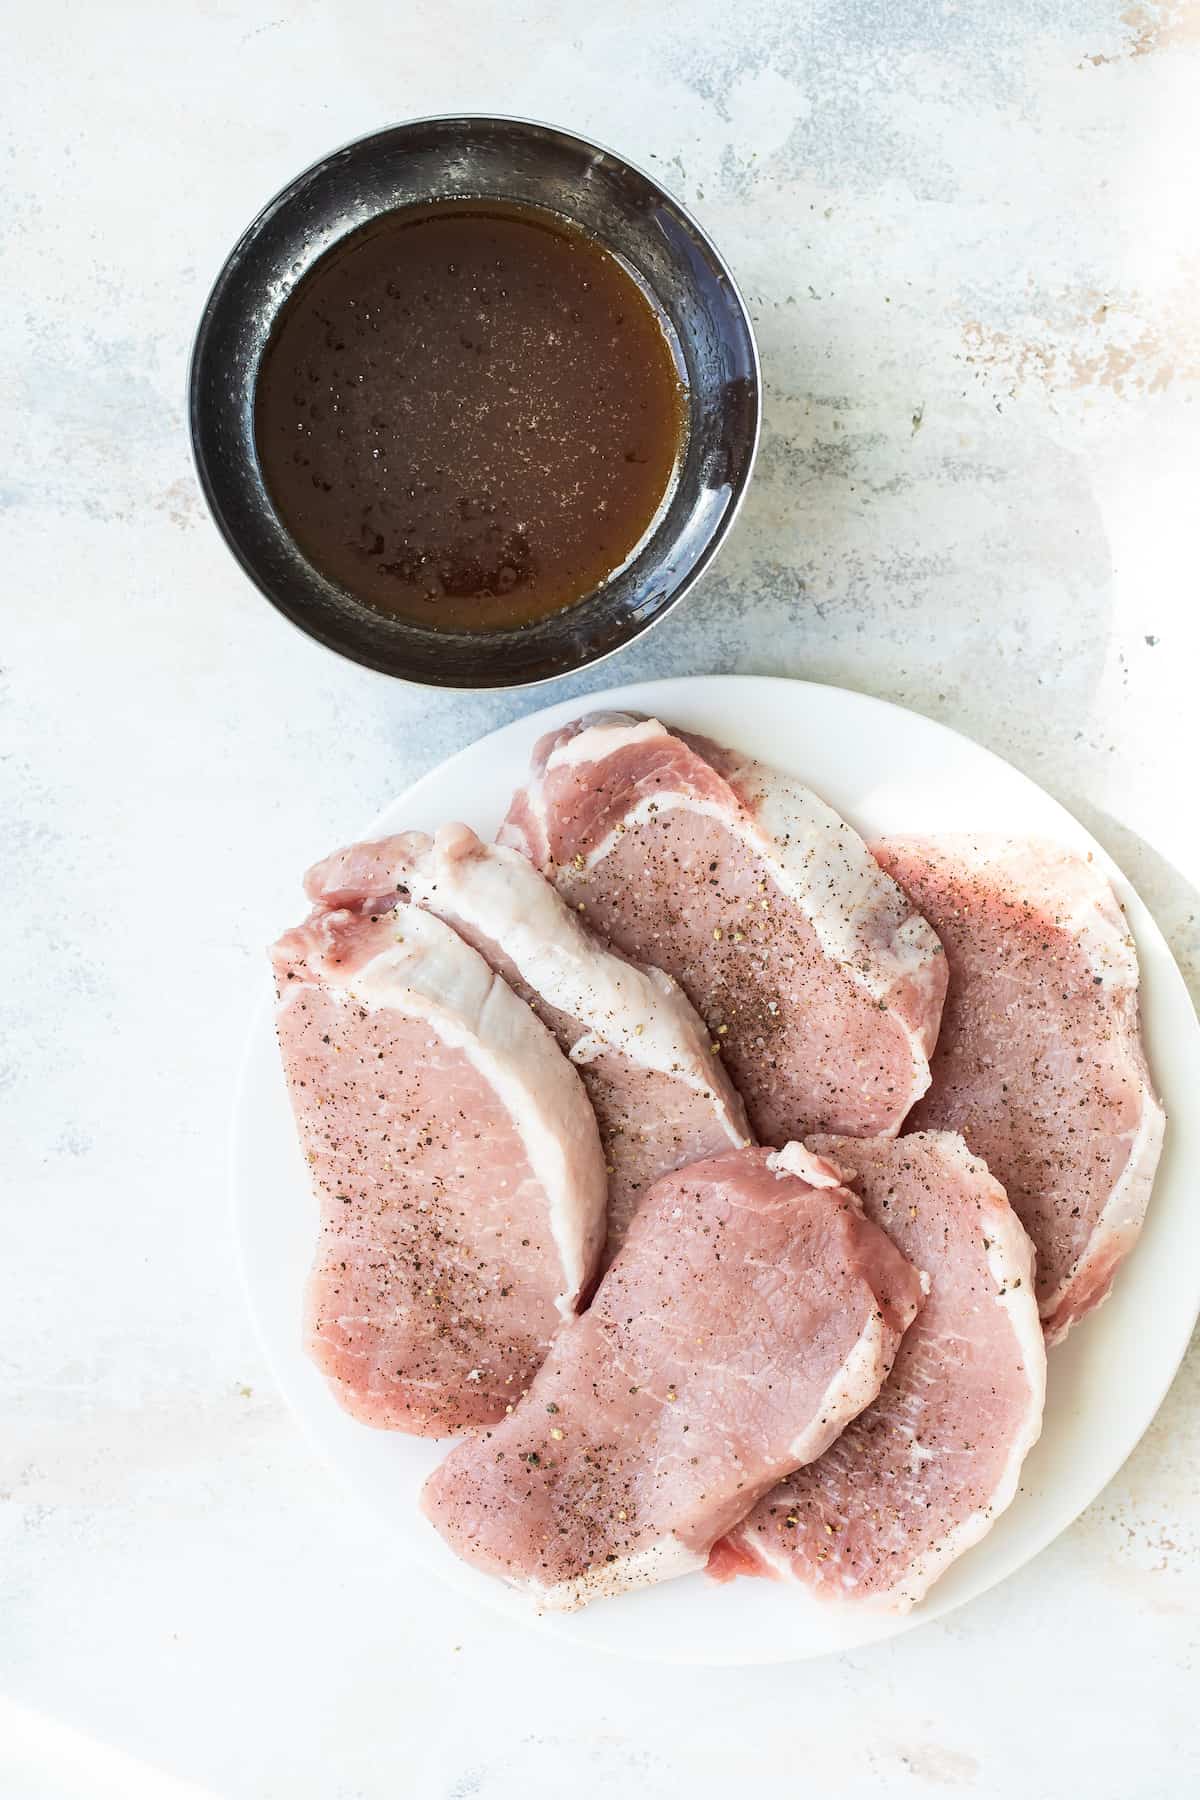 Seasoned Pork Chops on a Plate with a Dish of Marinade Beside Them